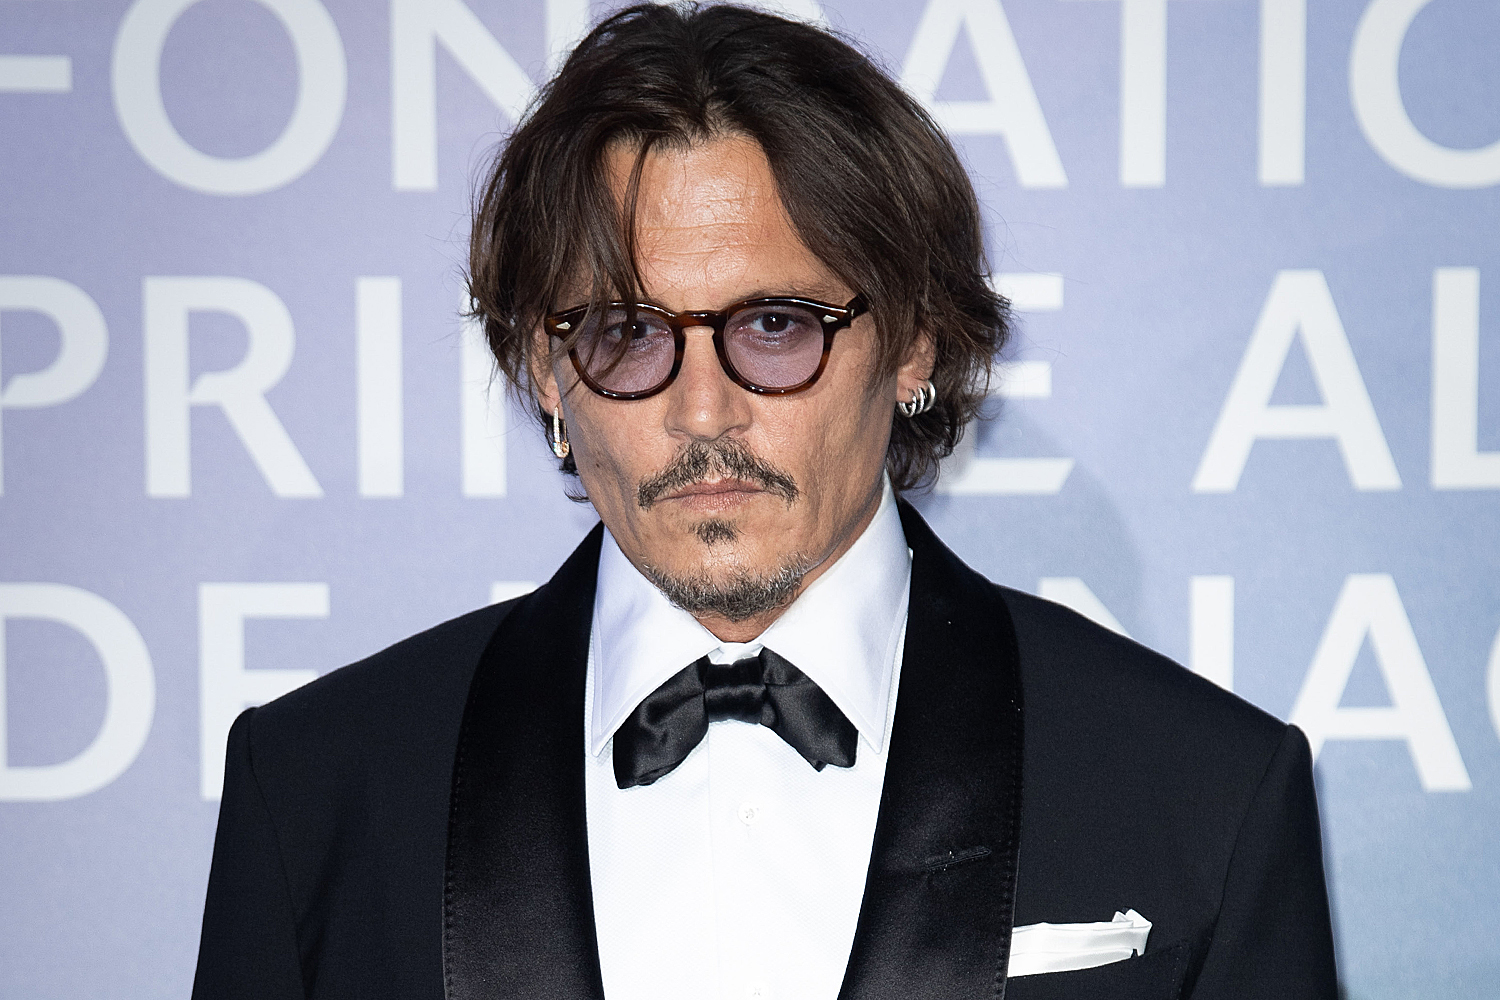 Johnny Depp Lengthy Legal Battle Against Her Ex-wife Continues